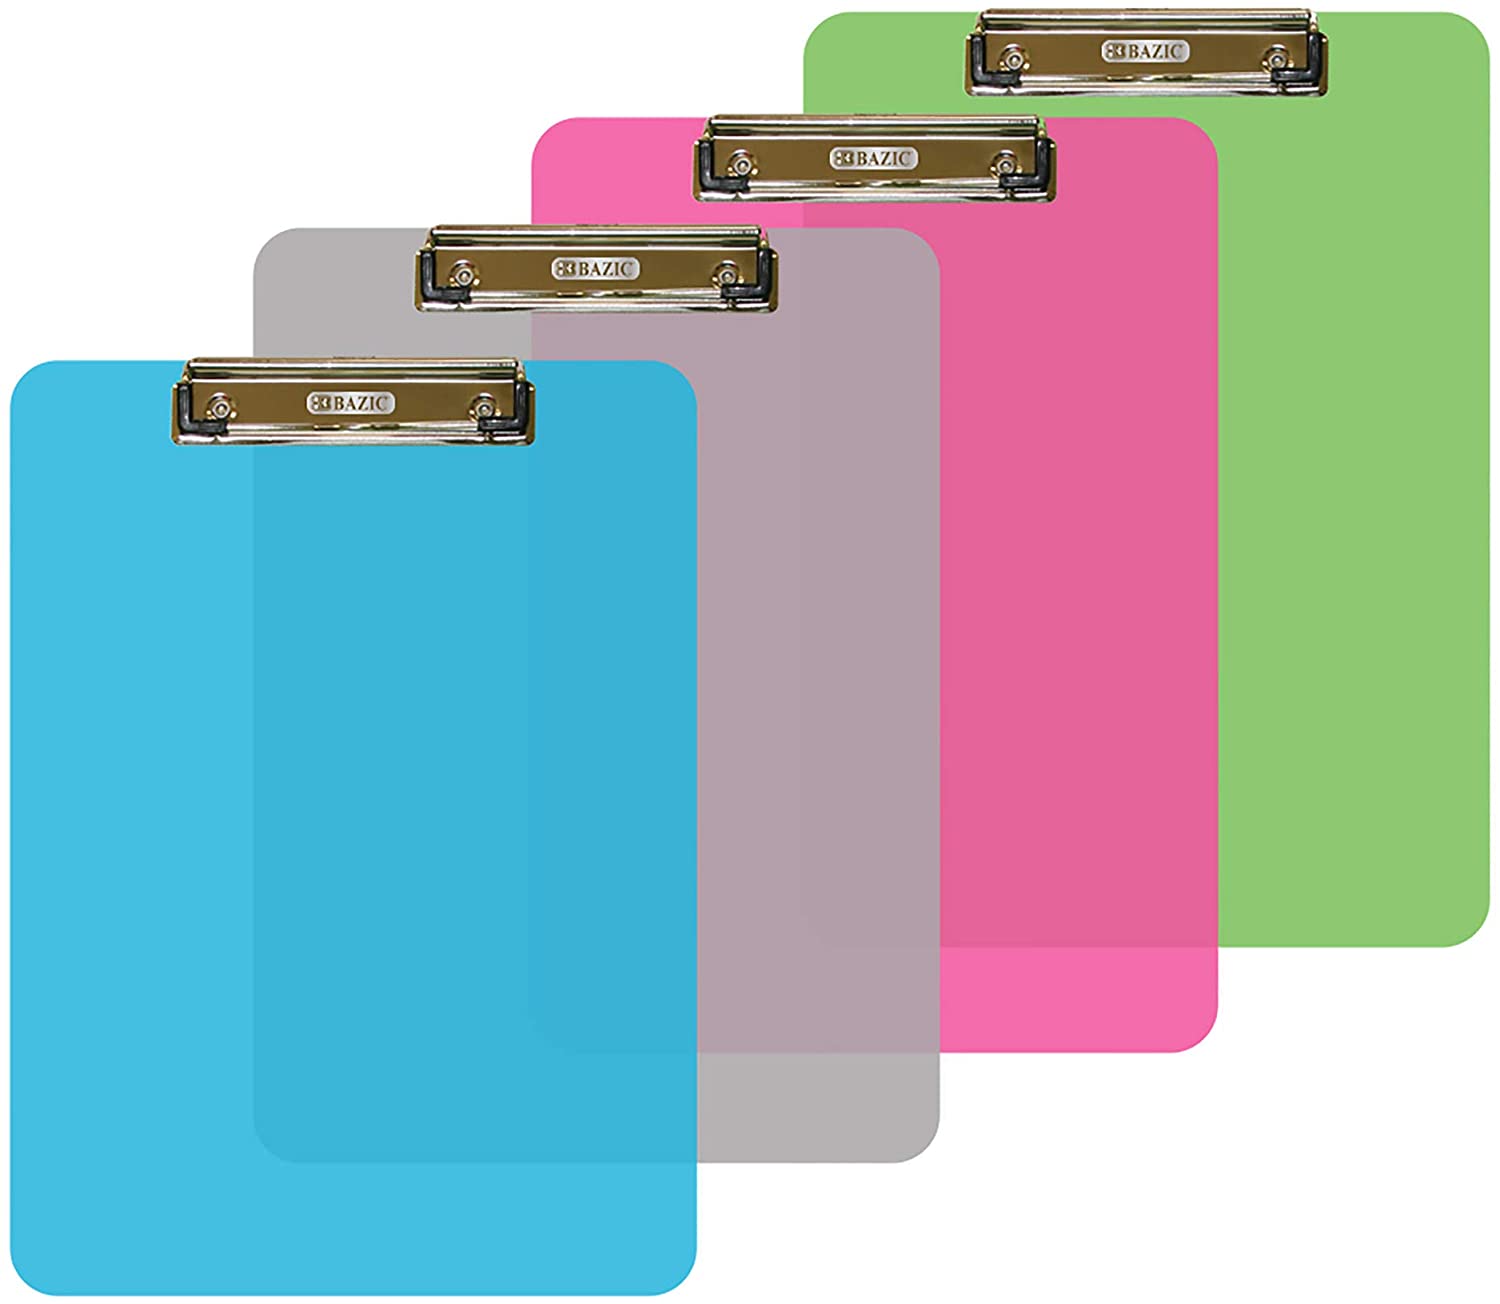 Plastic Clipboard Low Profile Clip, A4 Letter Size Clear Assorted 4 Colors, Business Travel School Teacher Student College, 4-Pack.